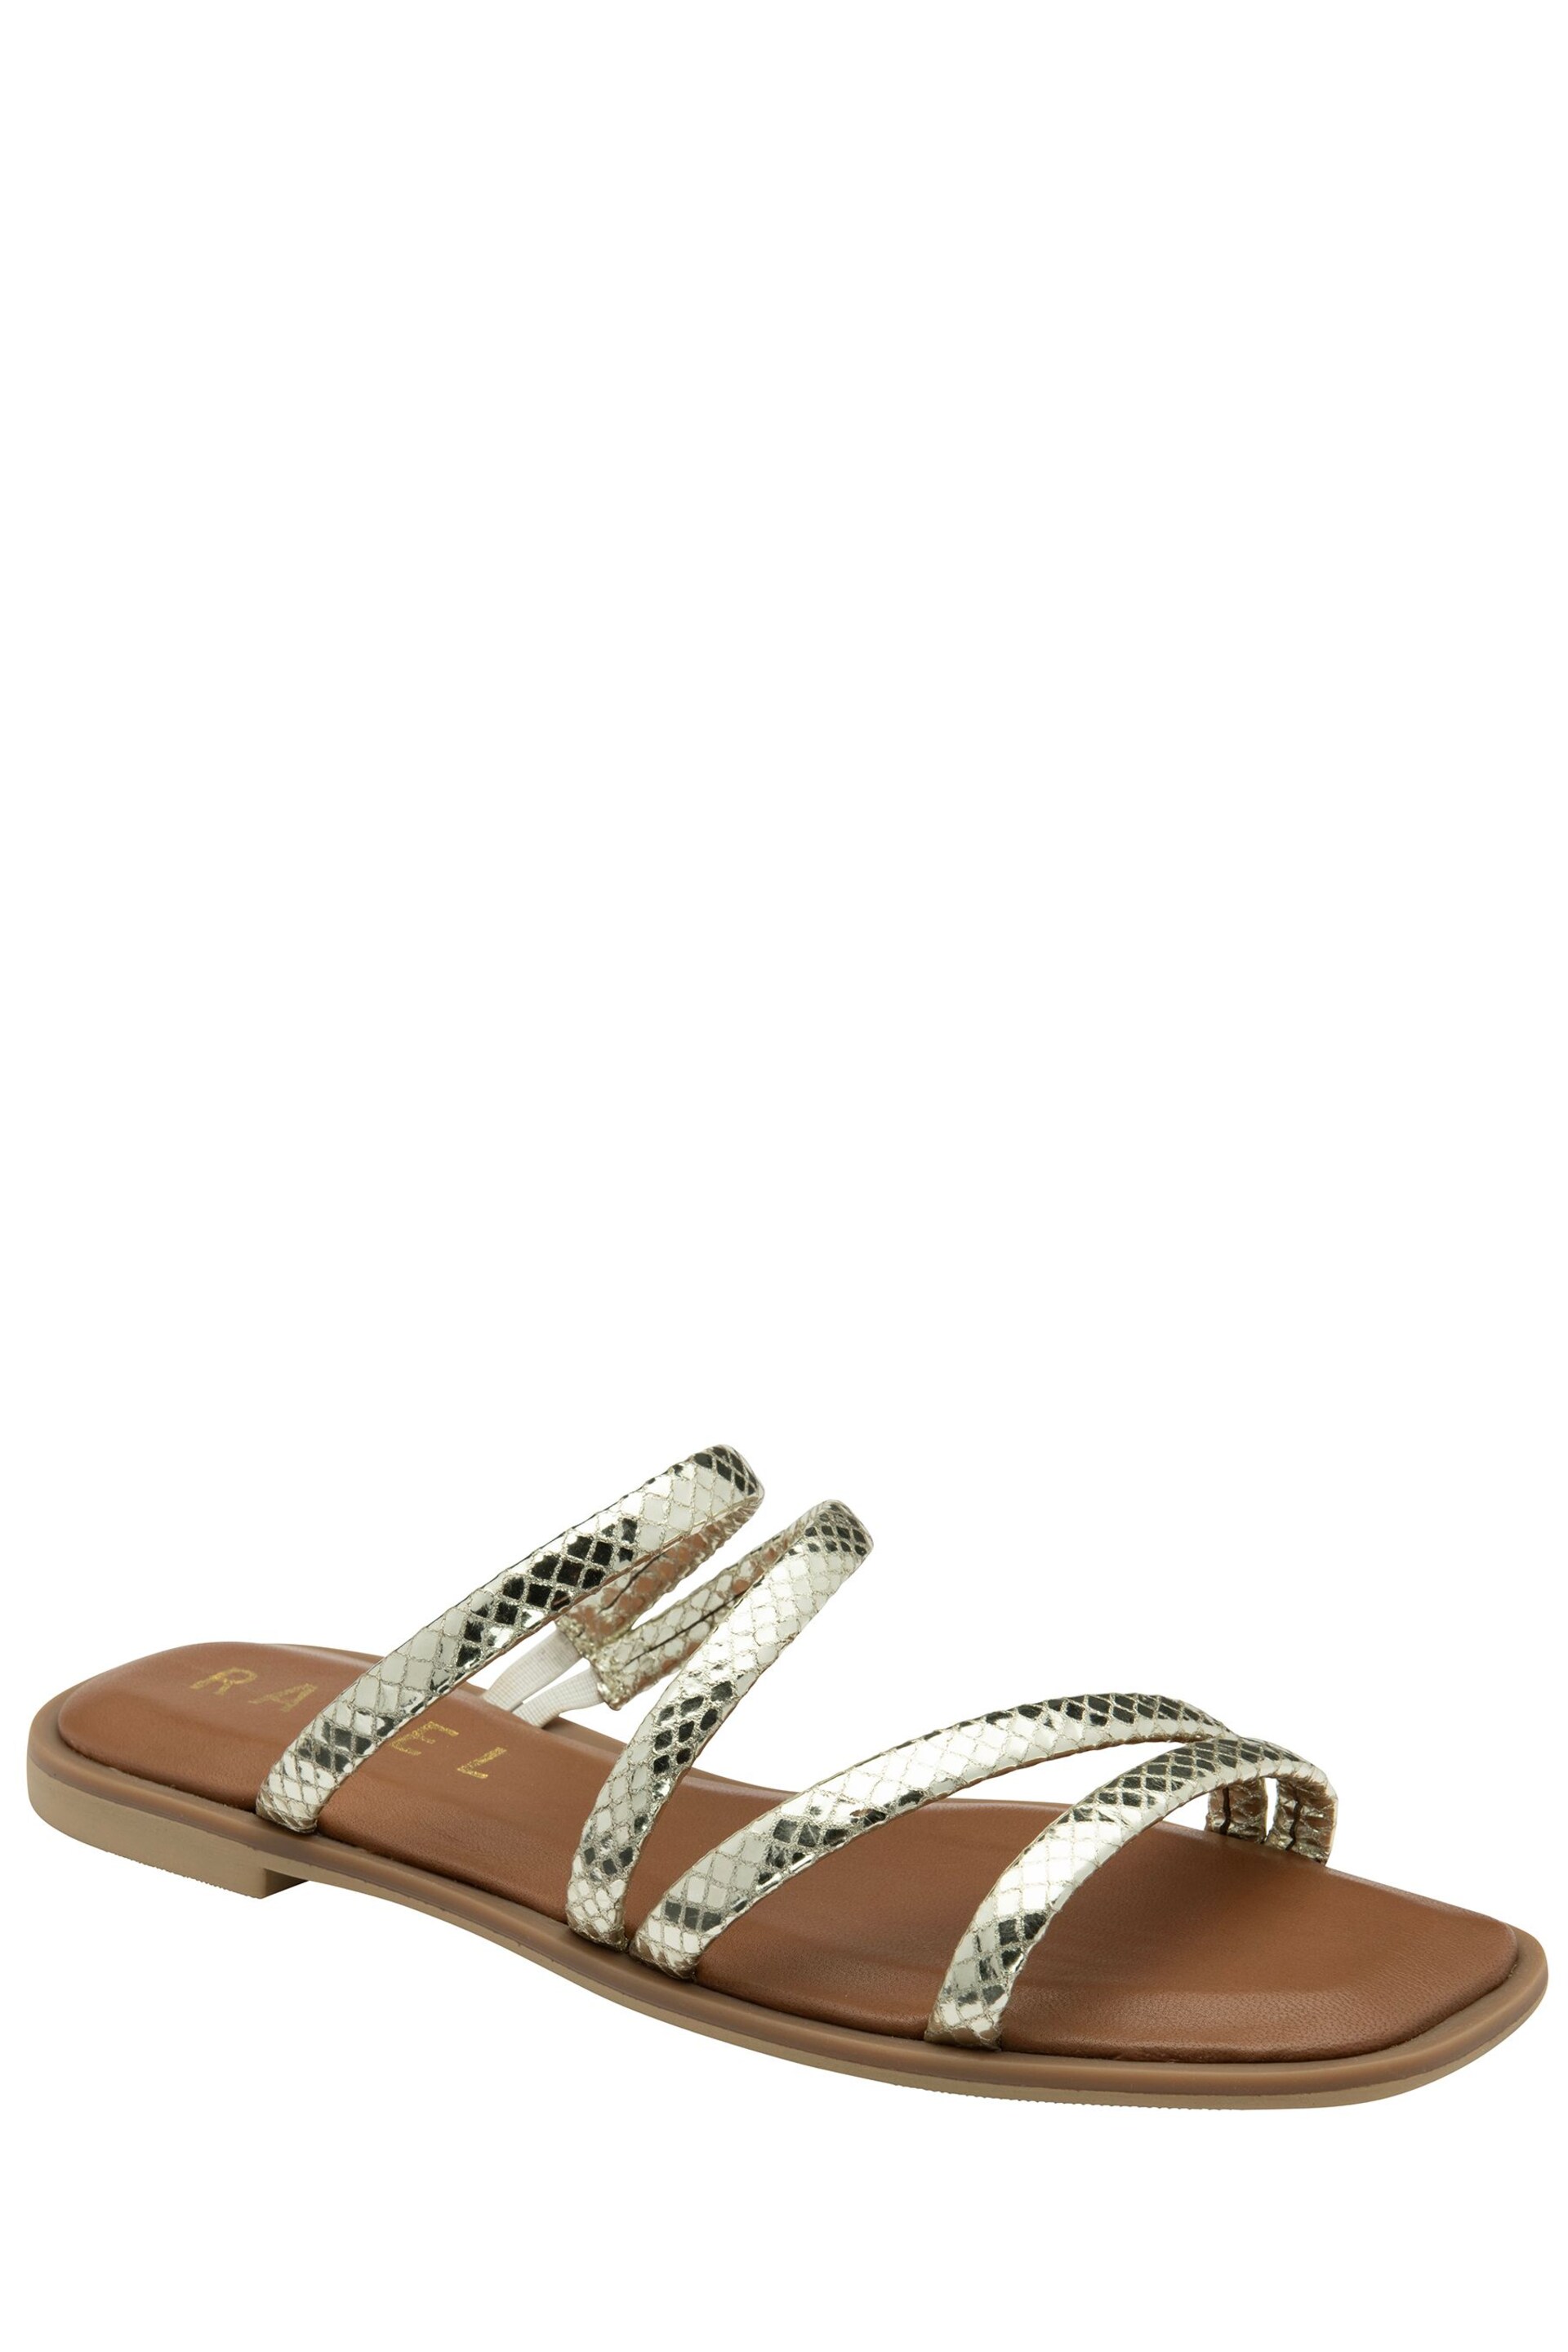 Ravel Silver/Brown Flat Strappy Mule Sandals - Image 1 of 4